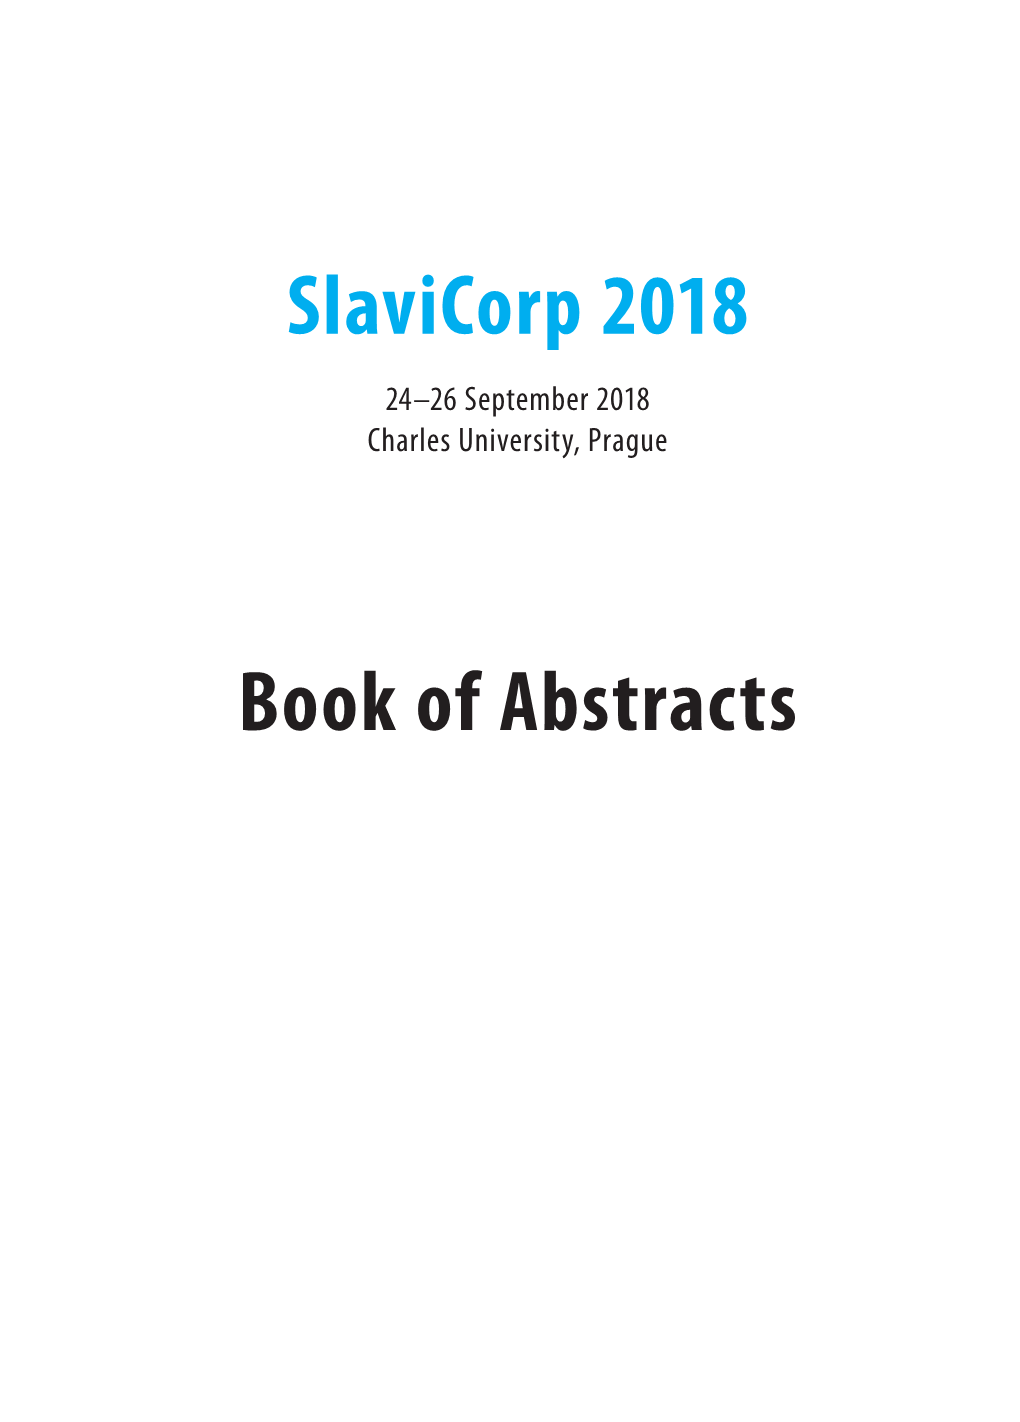 Slavicorp 2018 Book of Abstracts